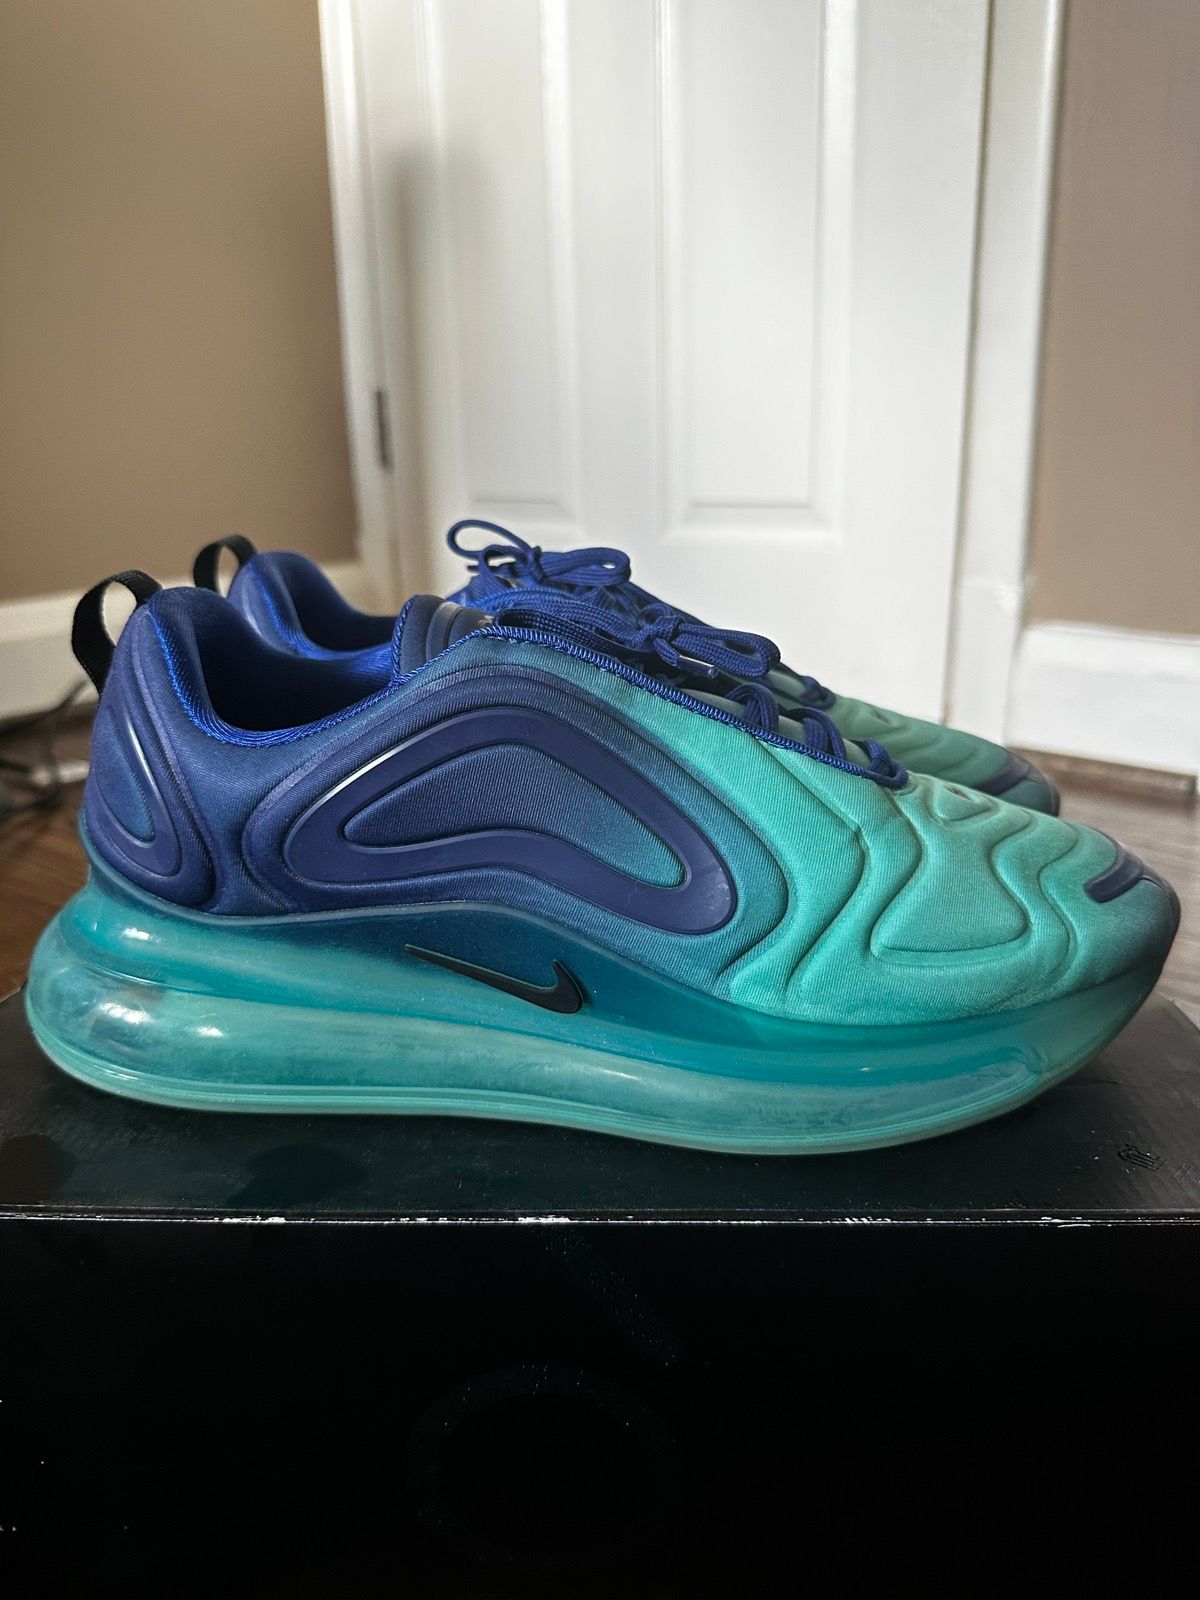 Nike Air Max 720 Sea Forest Size US 10.5 / EU 43-44 - 1 Preview